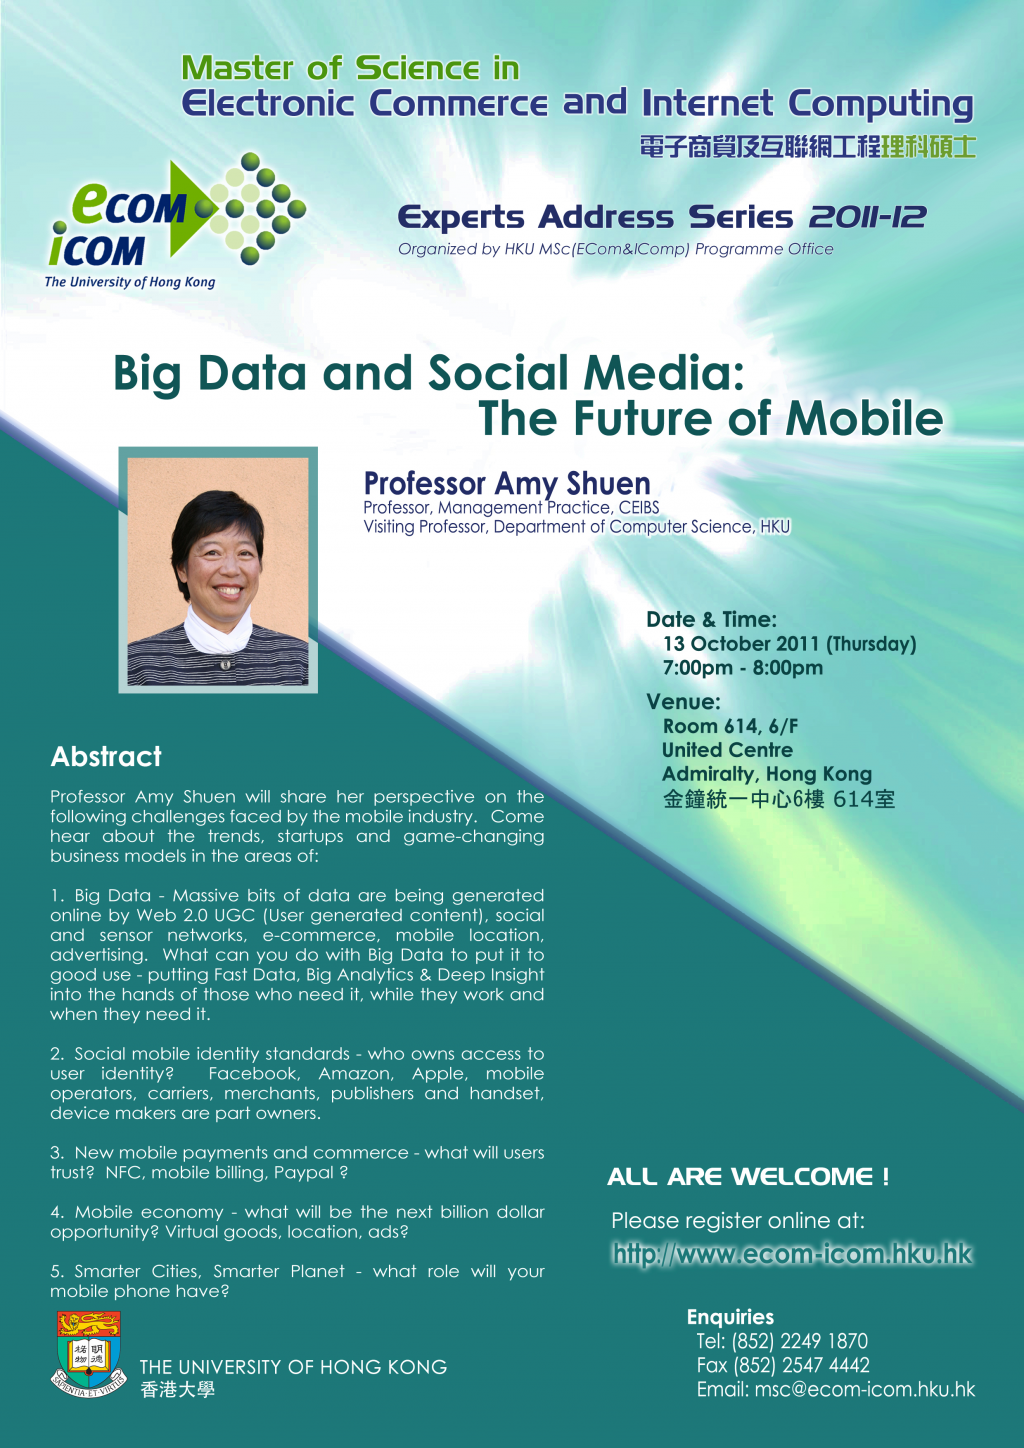 Big Data and Social Media: The Future of Mobile